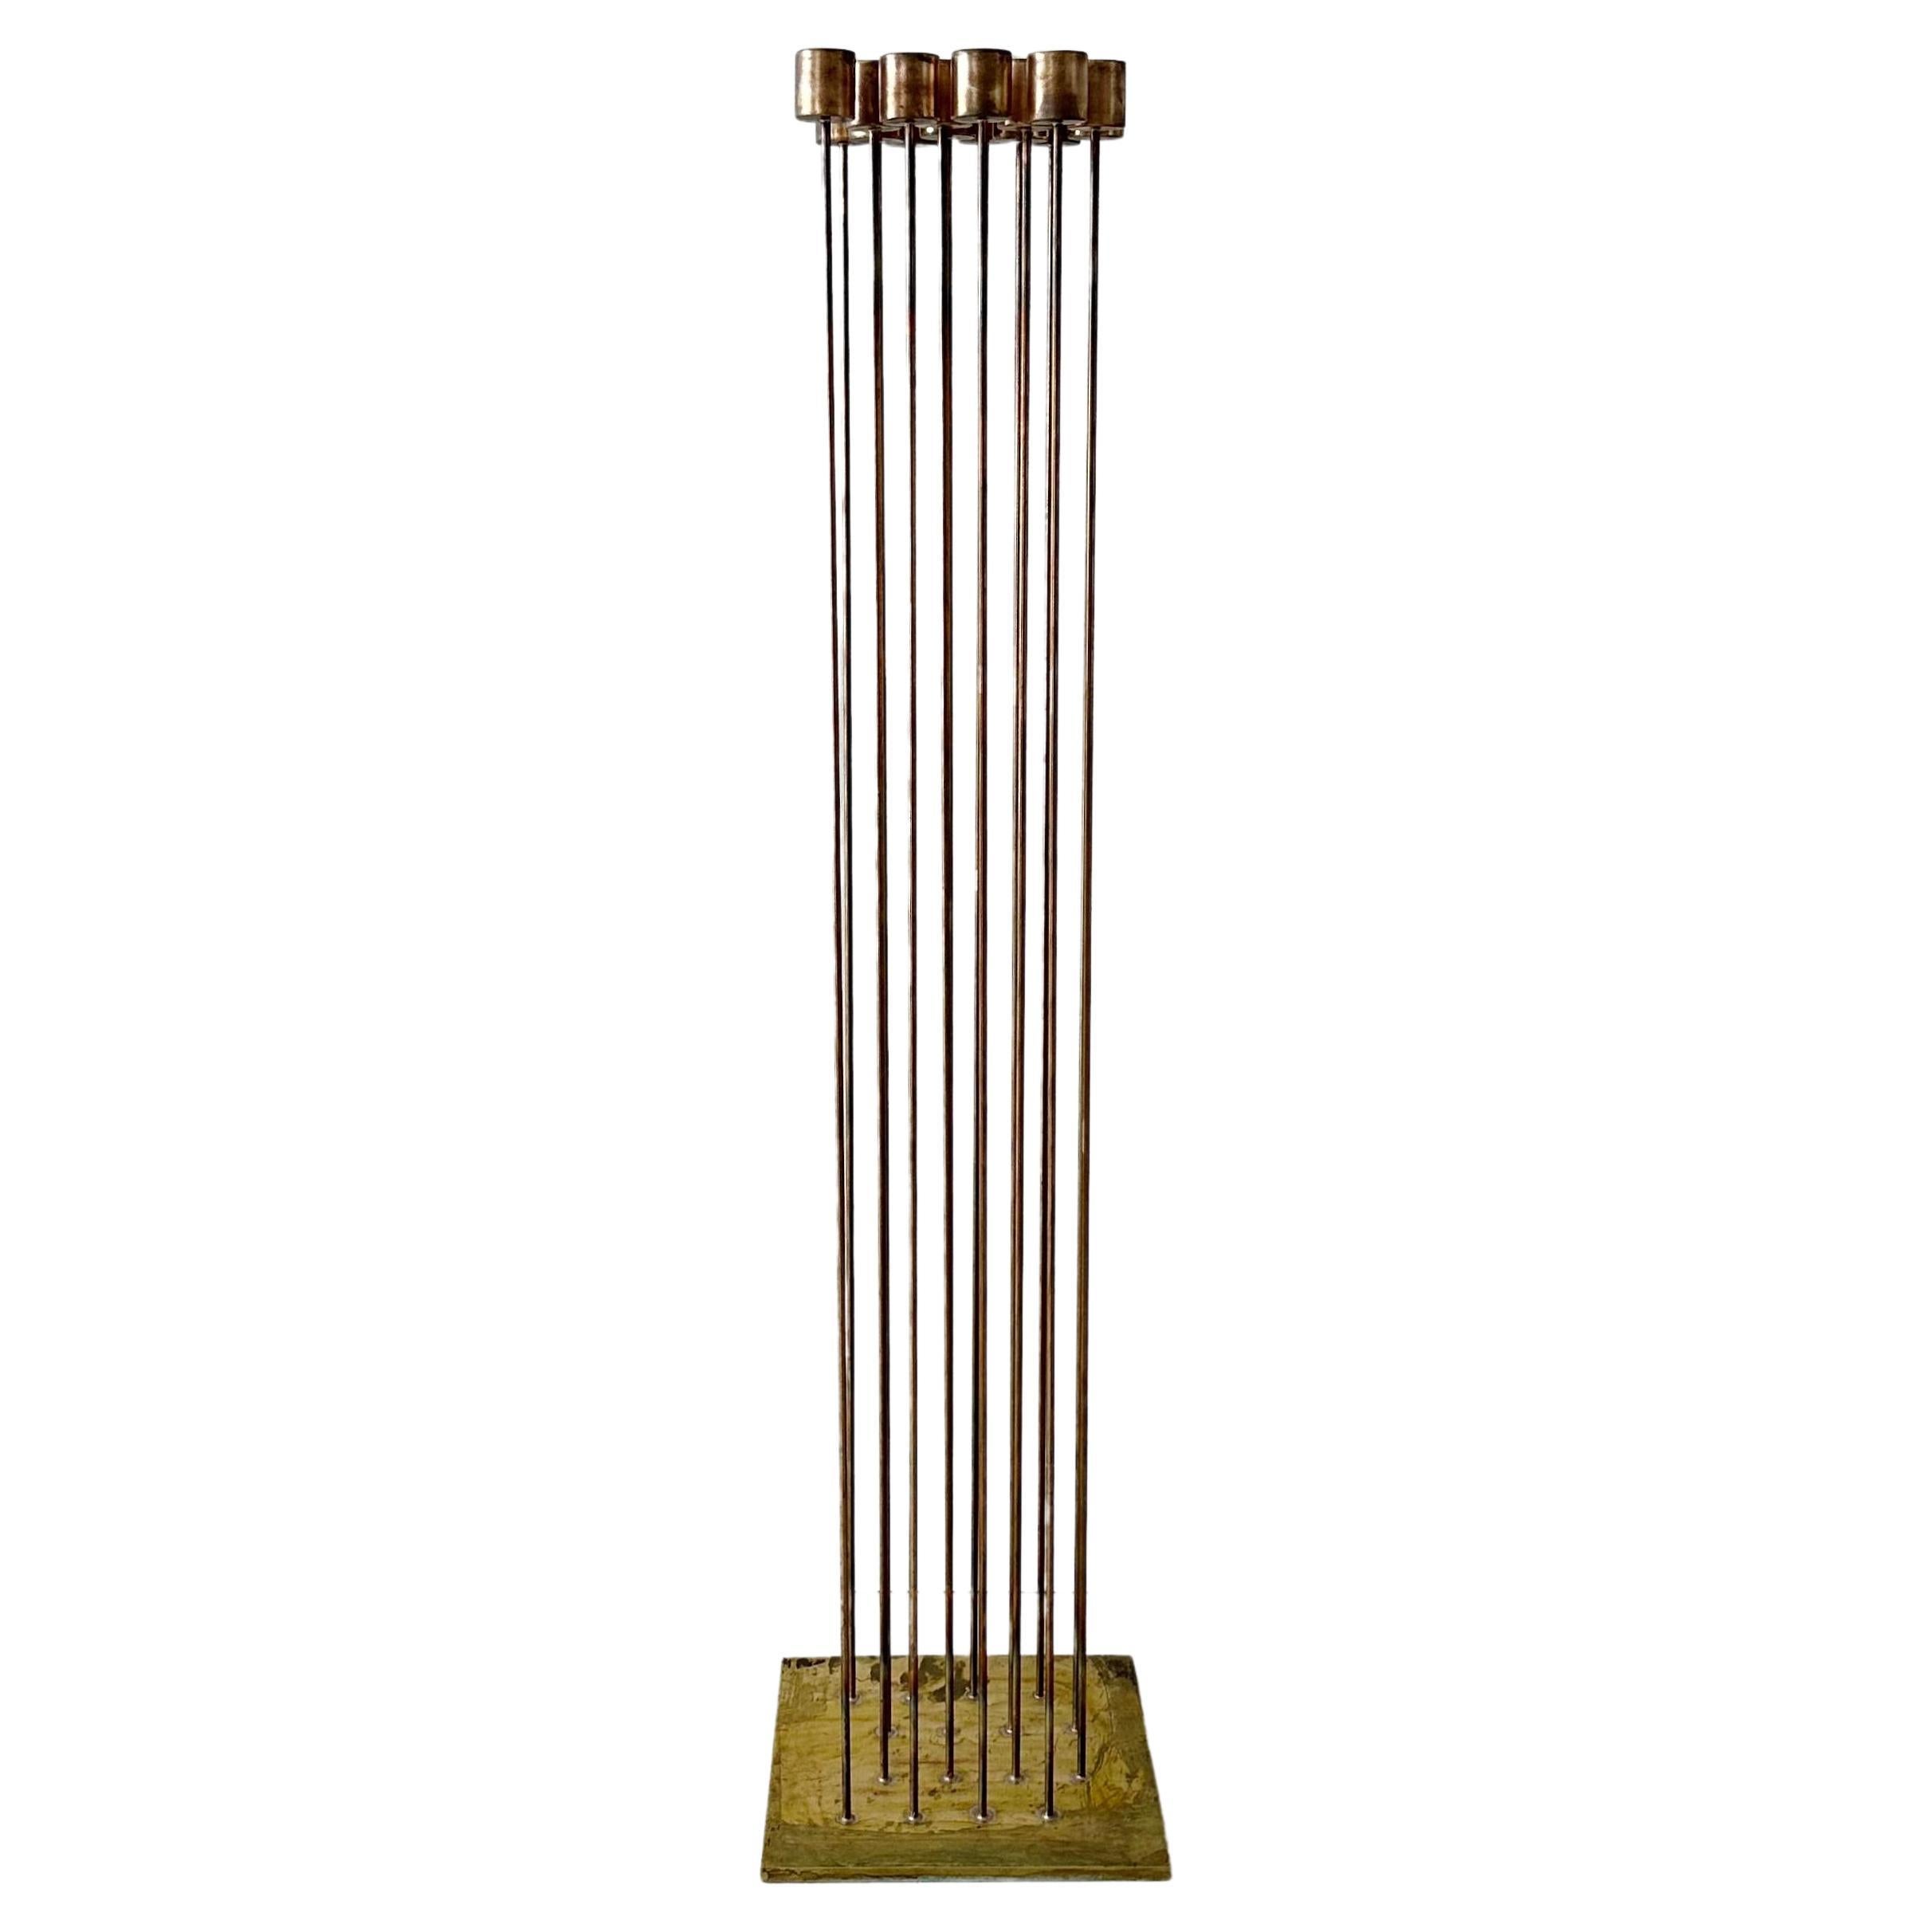 Val Bertoia B-2699 "Sounds from 16" Bronze Sculpture For Sale